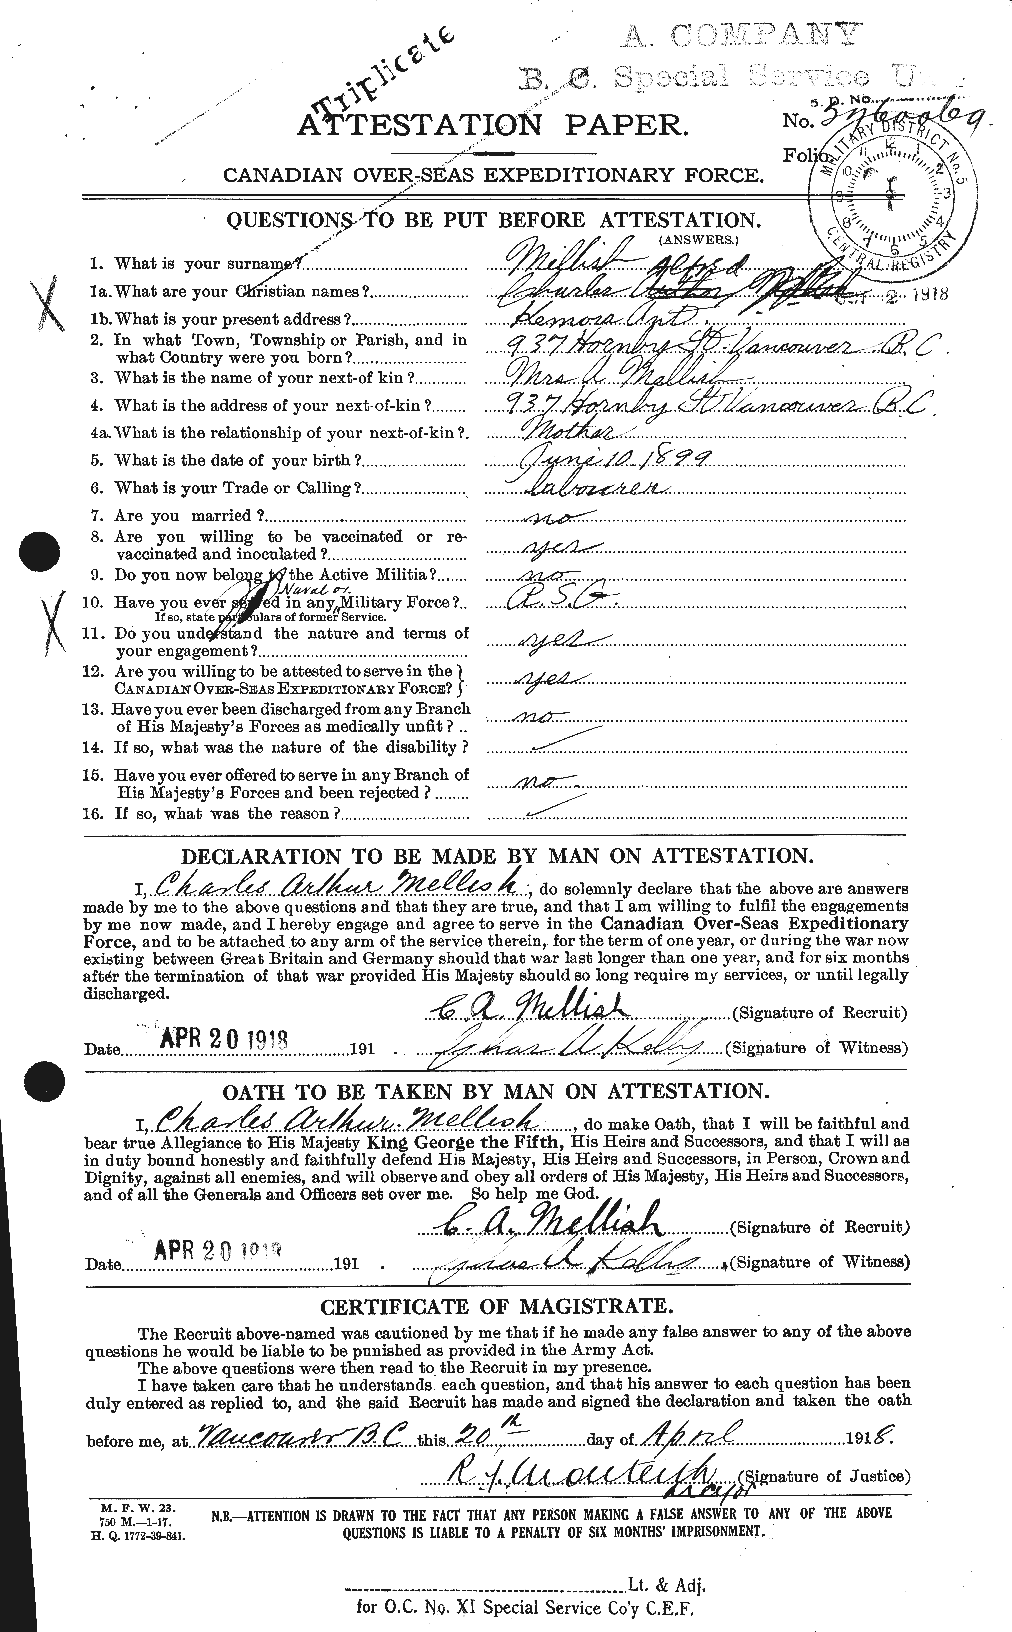 Personnel Records of the First World War - CEF 493749a